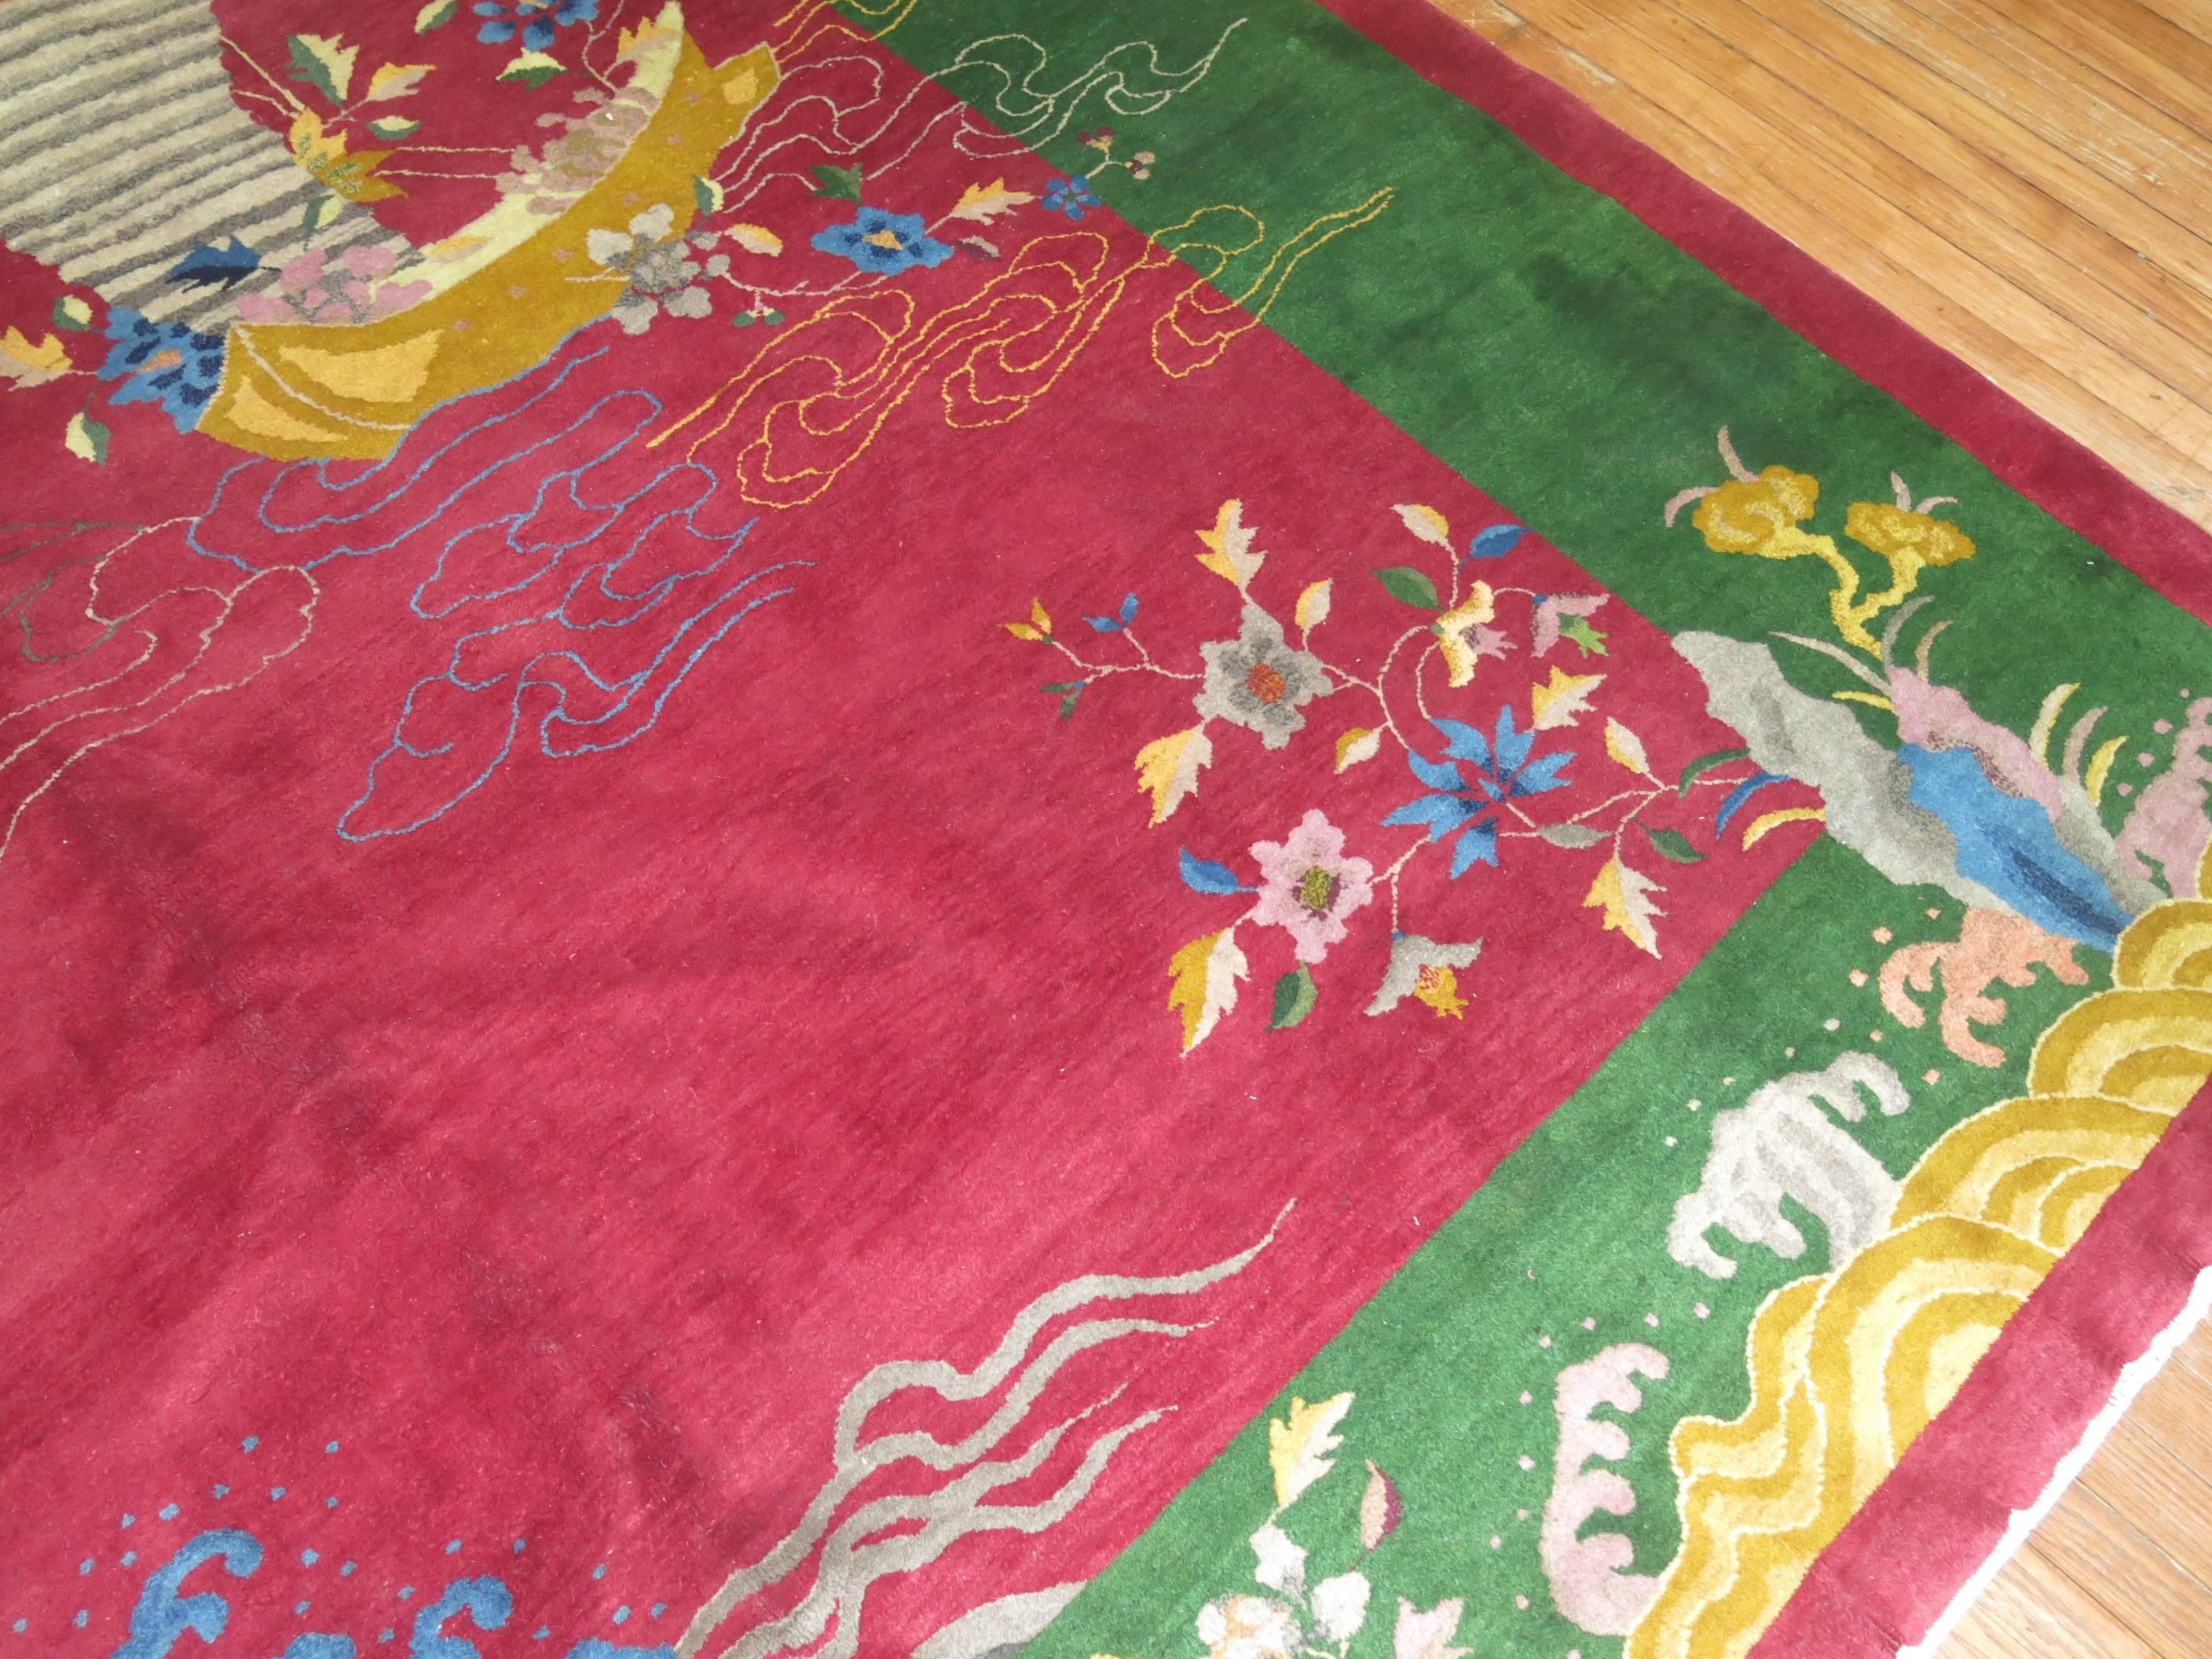 Stunning Chinese Art Deco rug with jewel tone colors. Rug features full pile in excellent condition with no repairs. 

Measures: 9' x 11'7”.